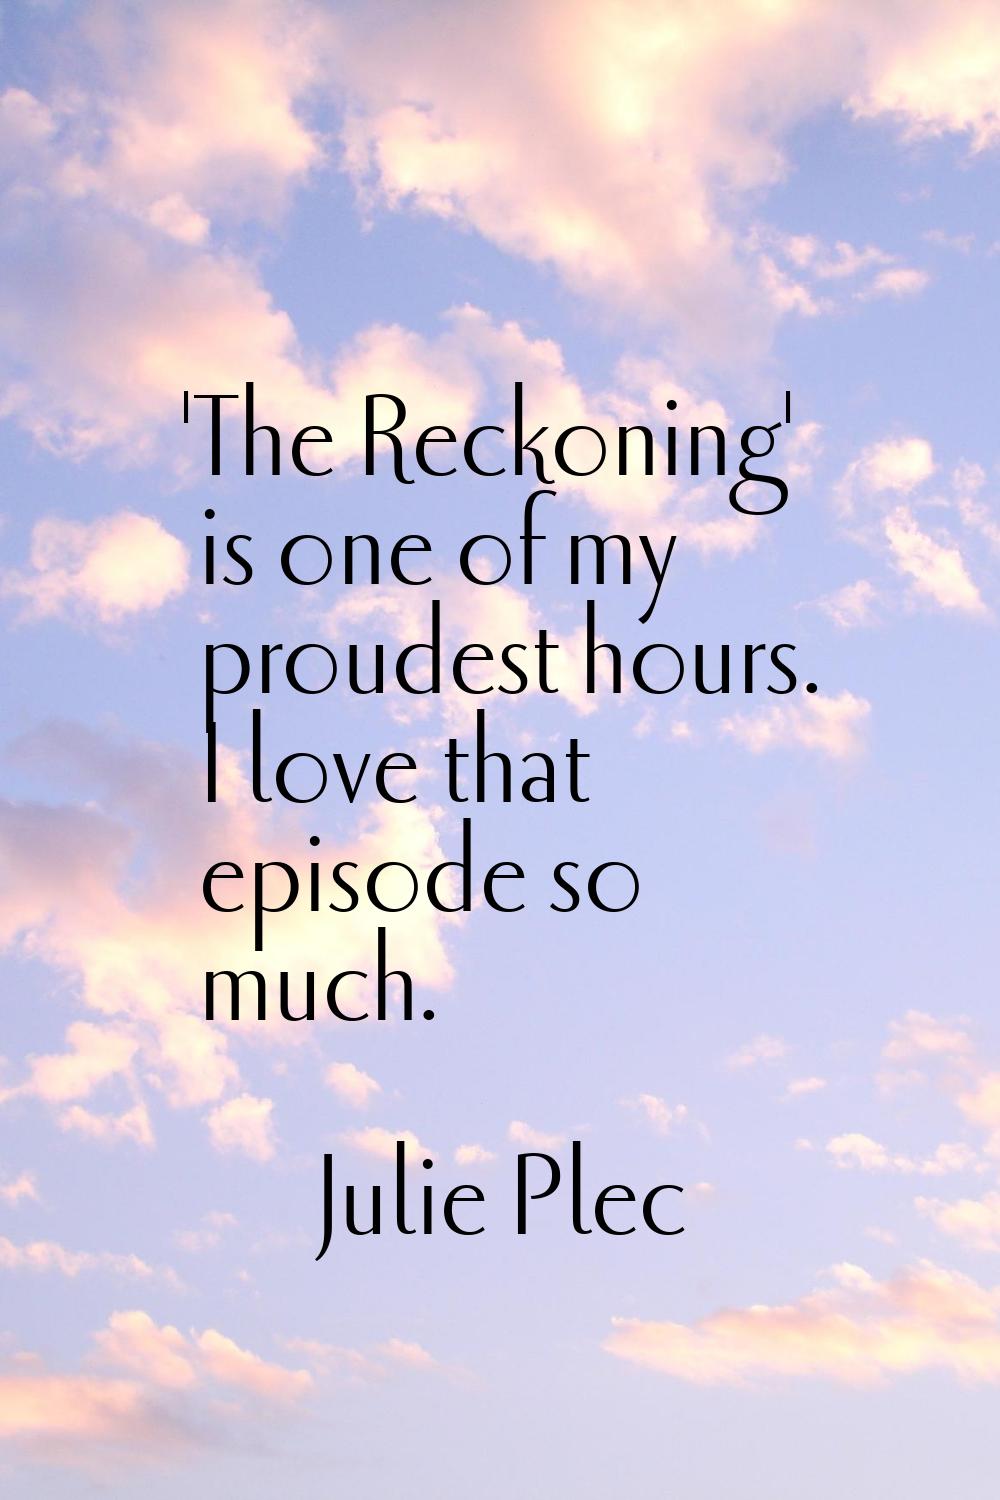 'The Reckoning' is one of my proudest hours. I love that episode so much.